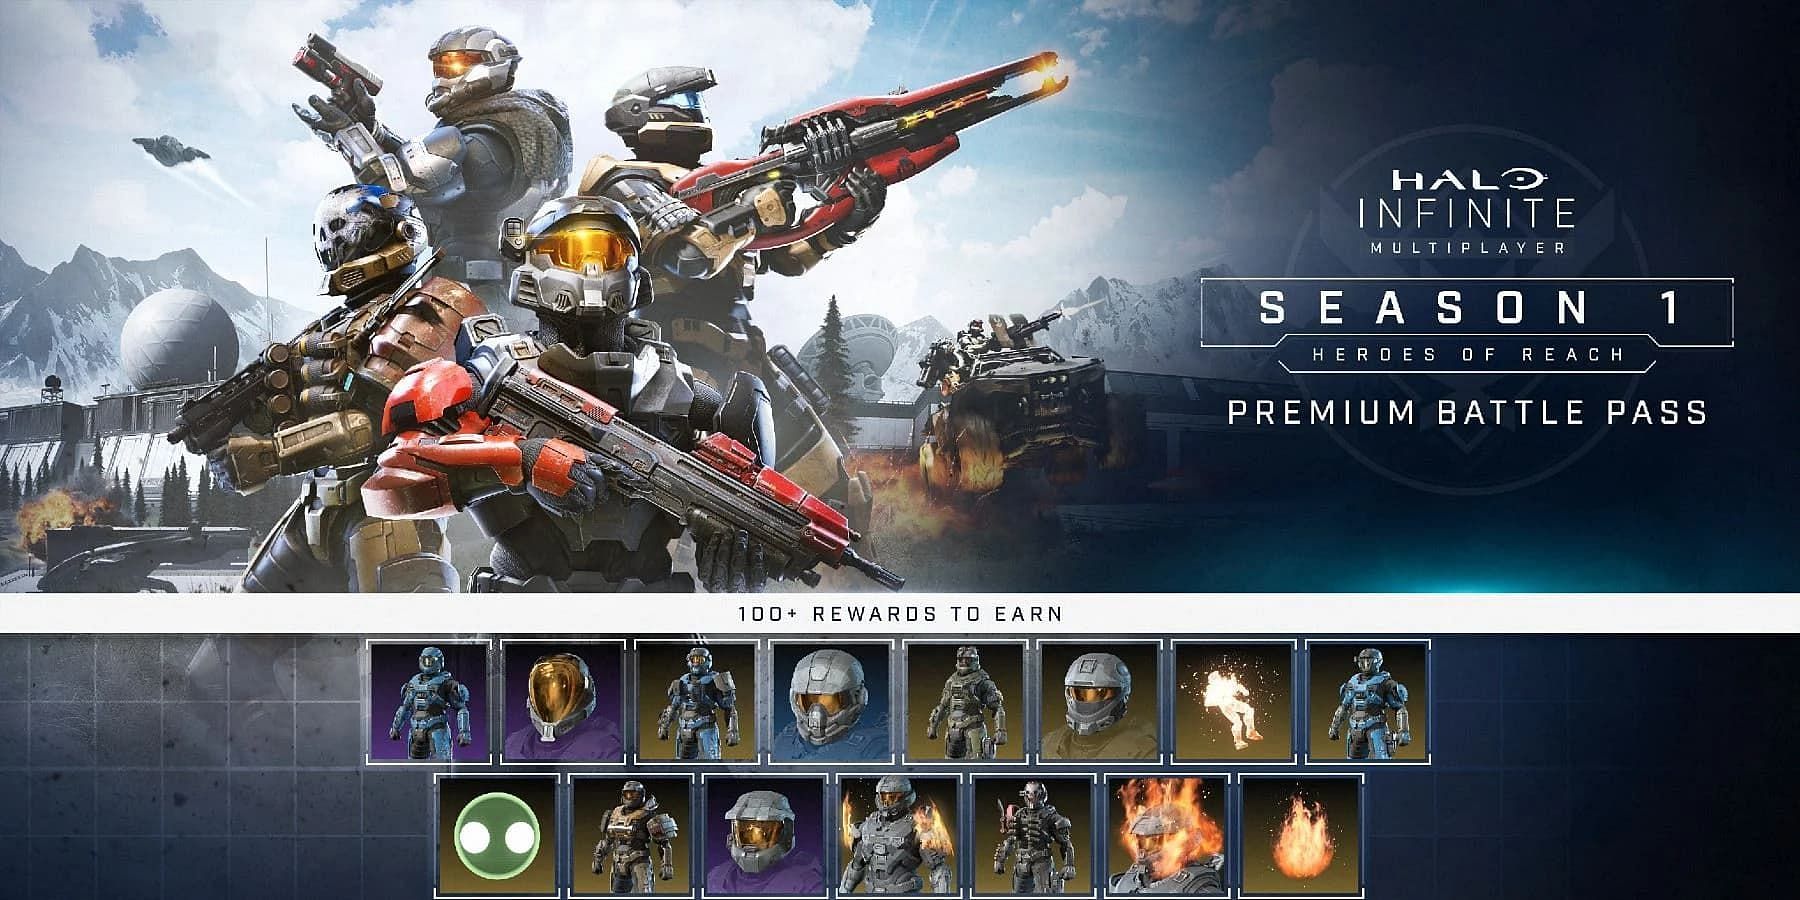 A look at the Season 1 Halo Infinite battle pass. (Image via 343 Industries)